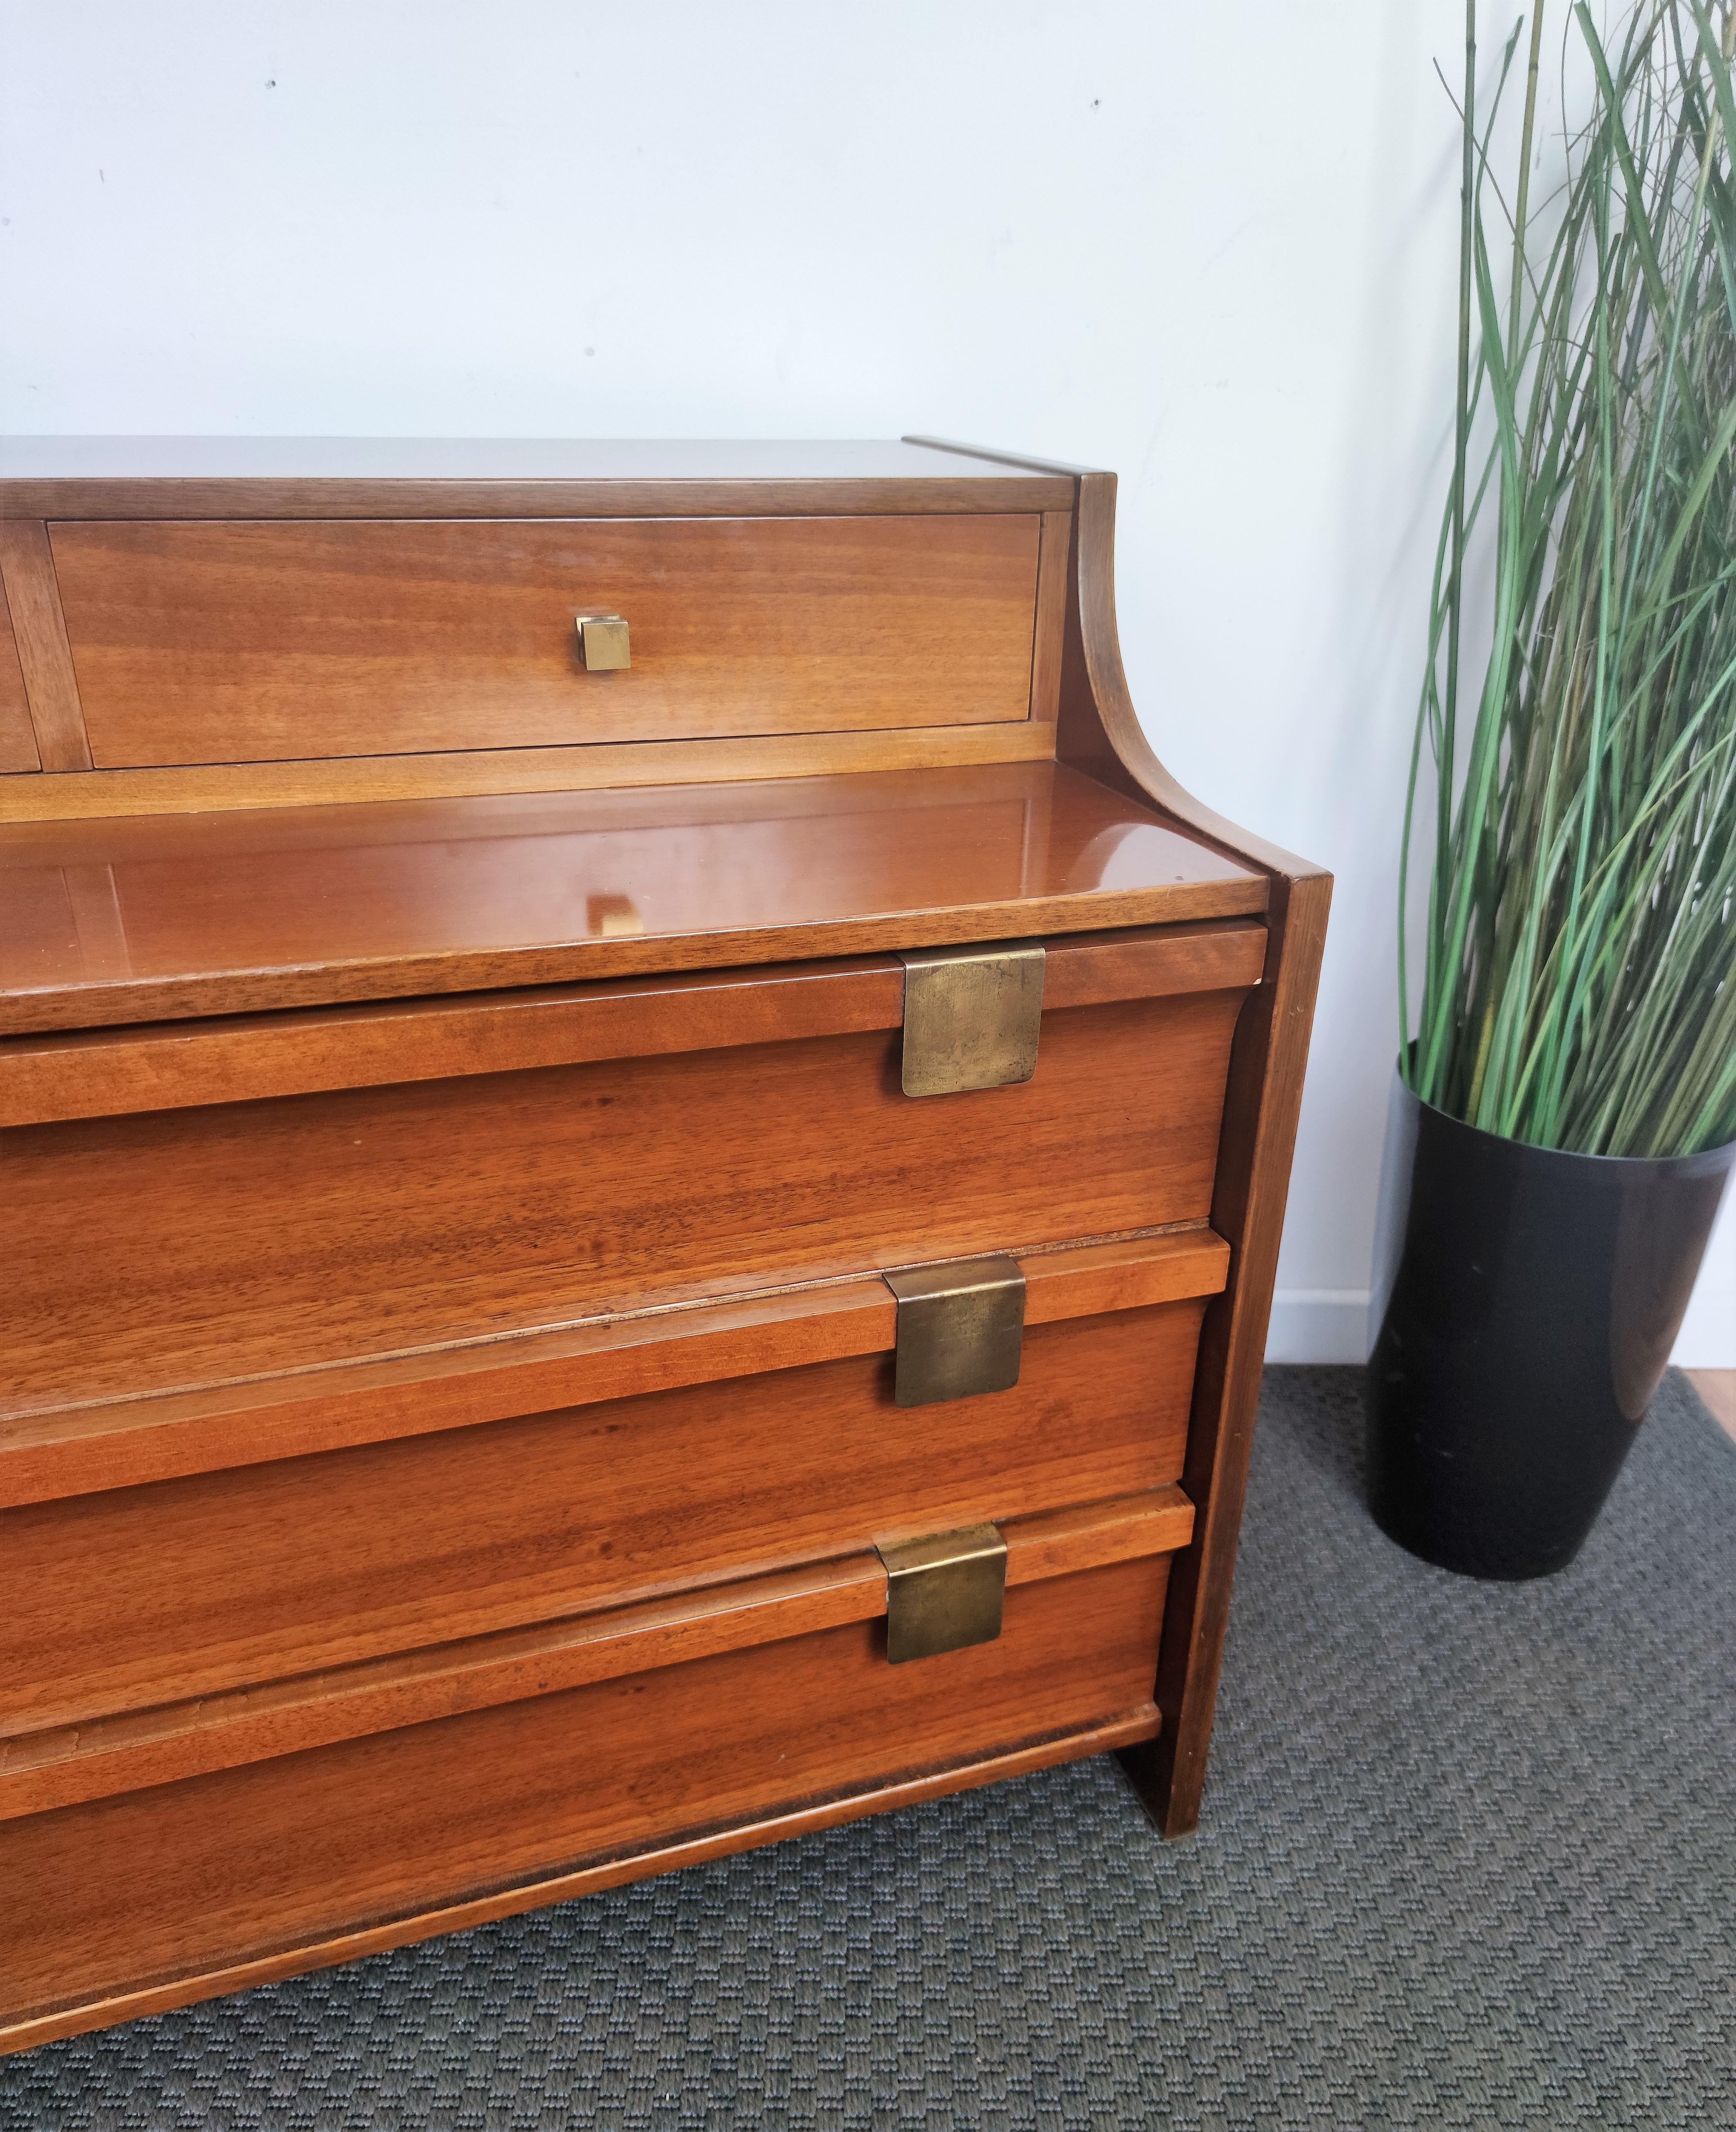 1960s Italian Mid-Century Modern Wood and Brass Commode Dresser Chest of Drawers In Good Condition For Sale In Carimate, Como